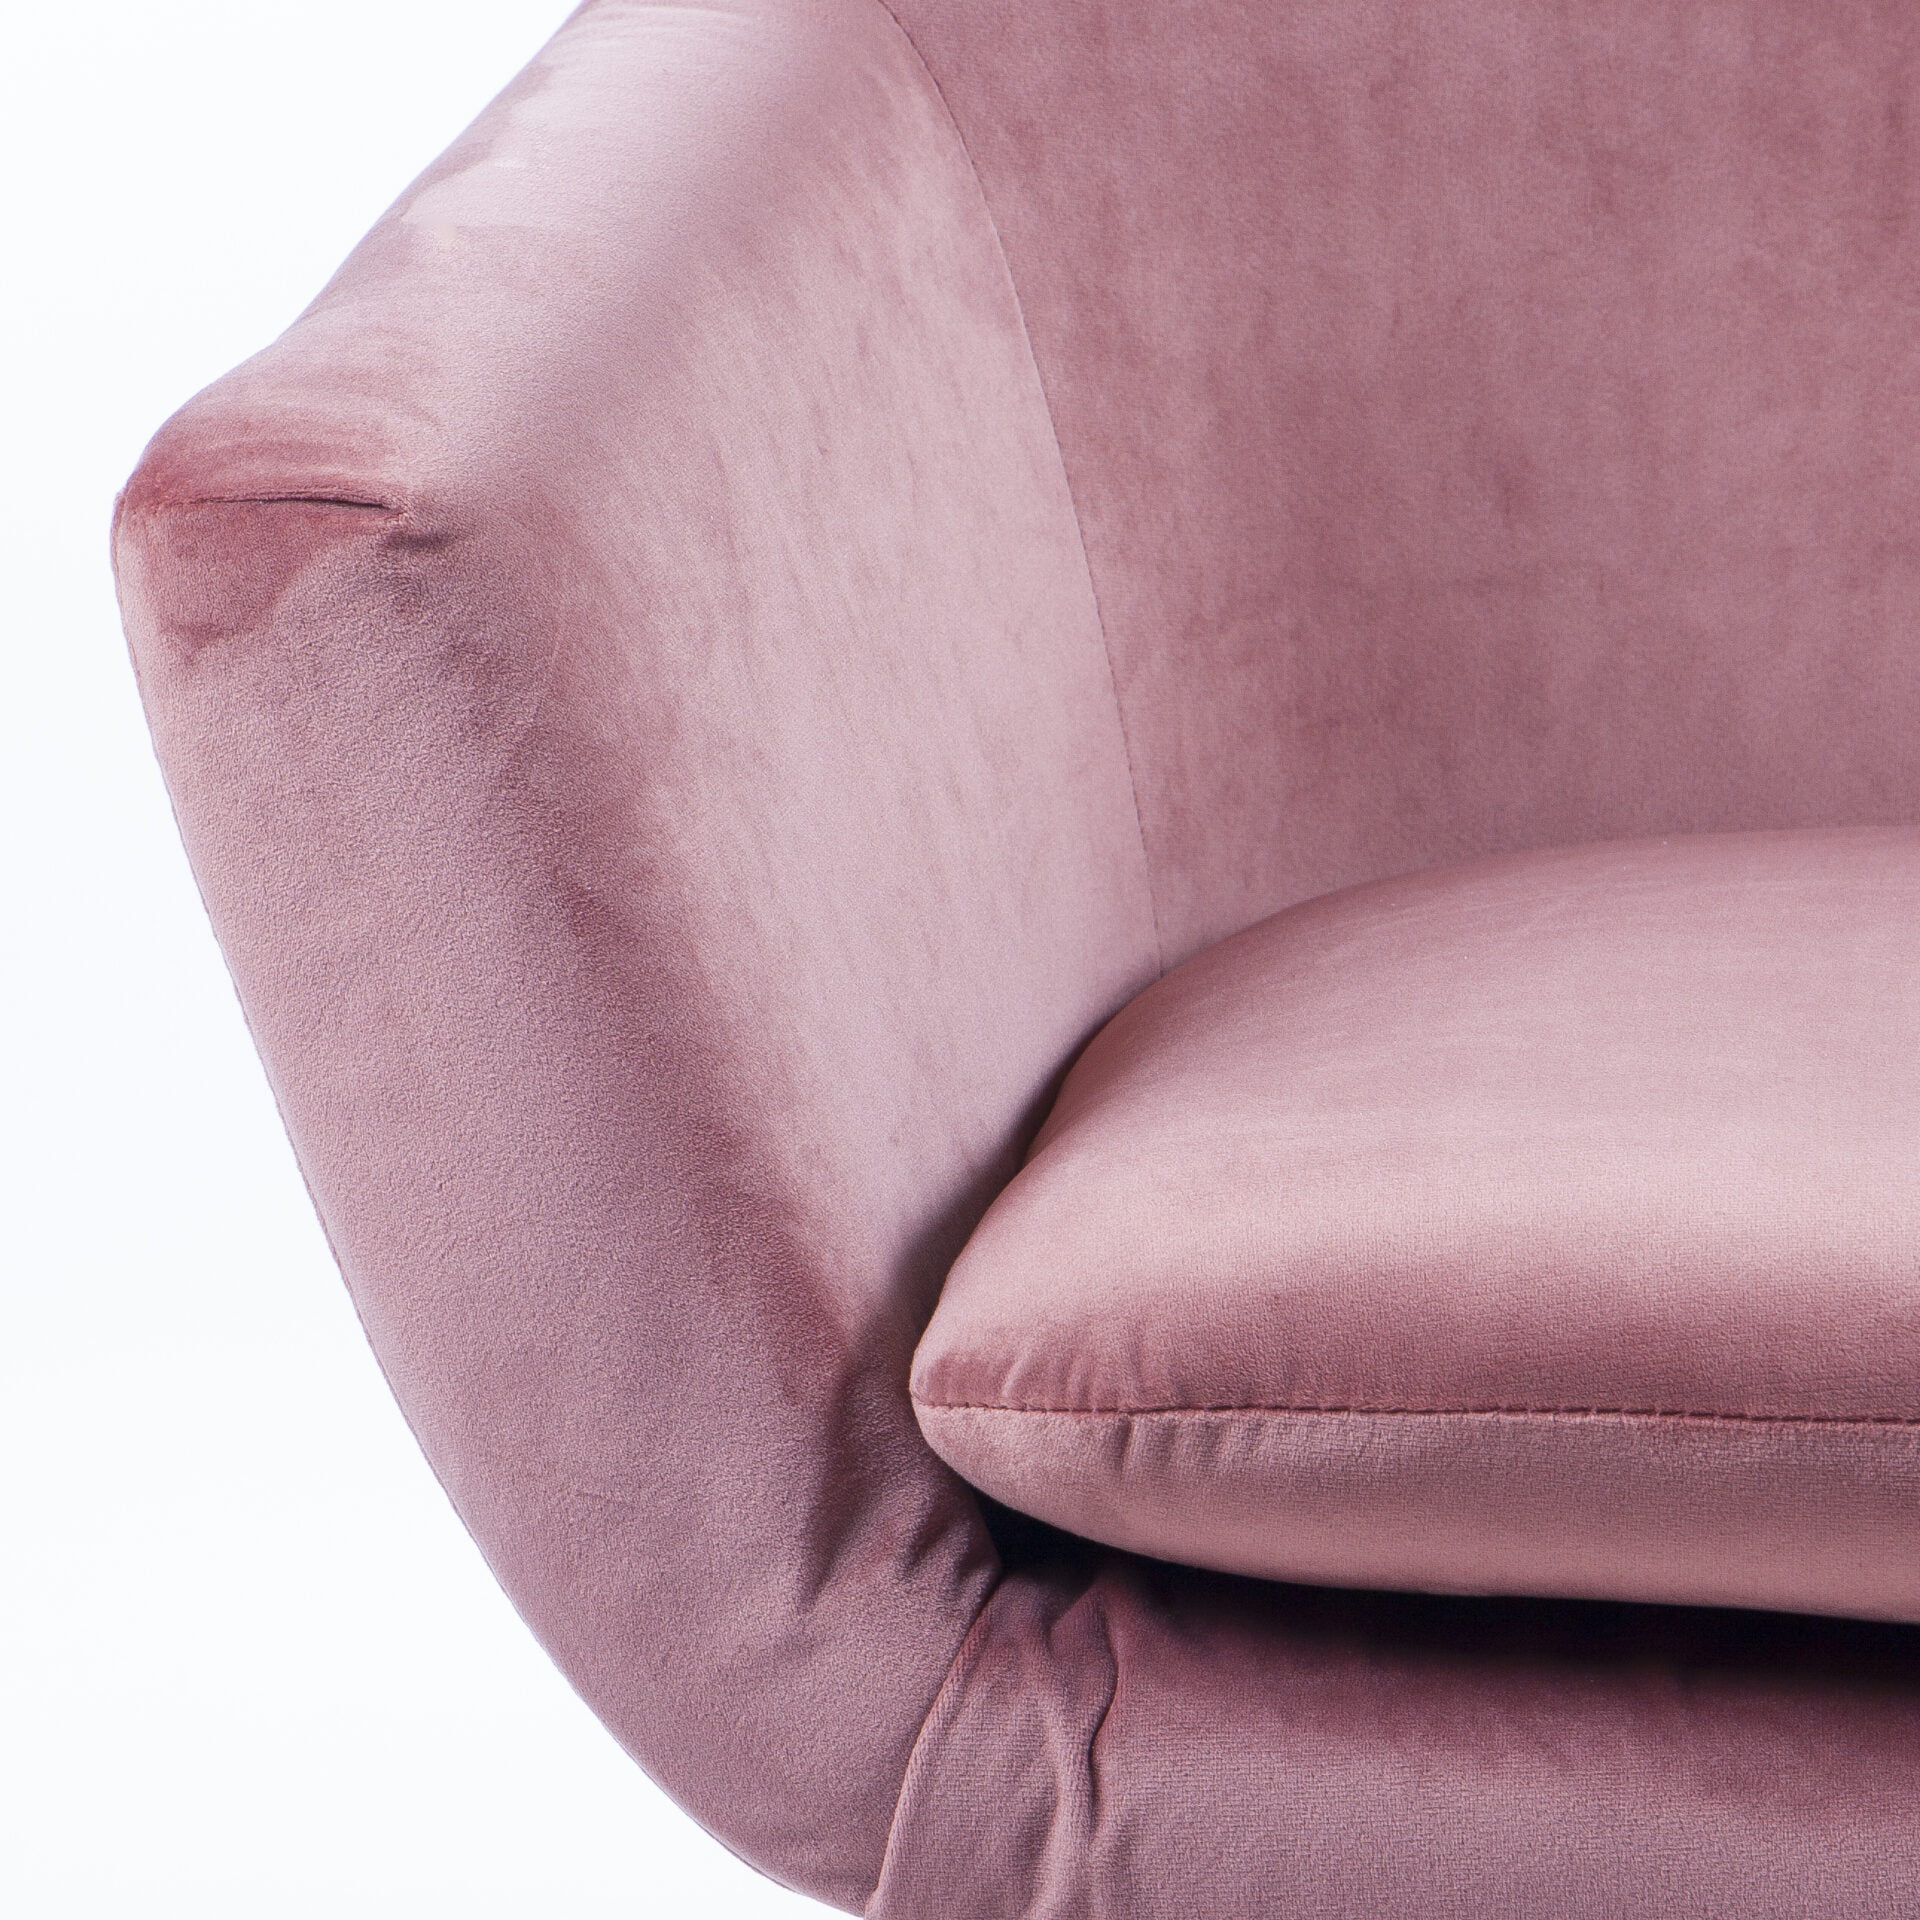 Fauteuil Isidore velours Rose nude